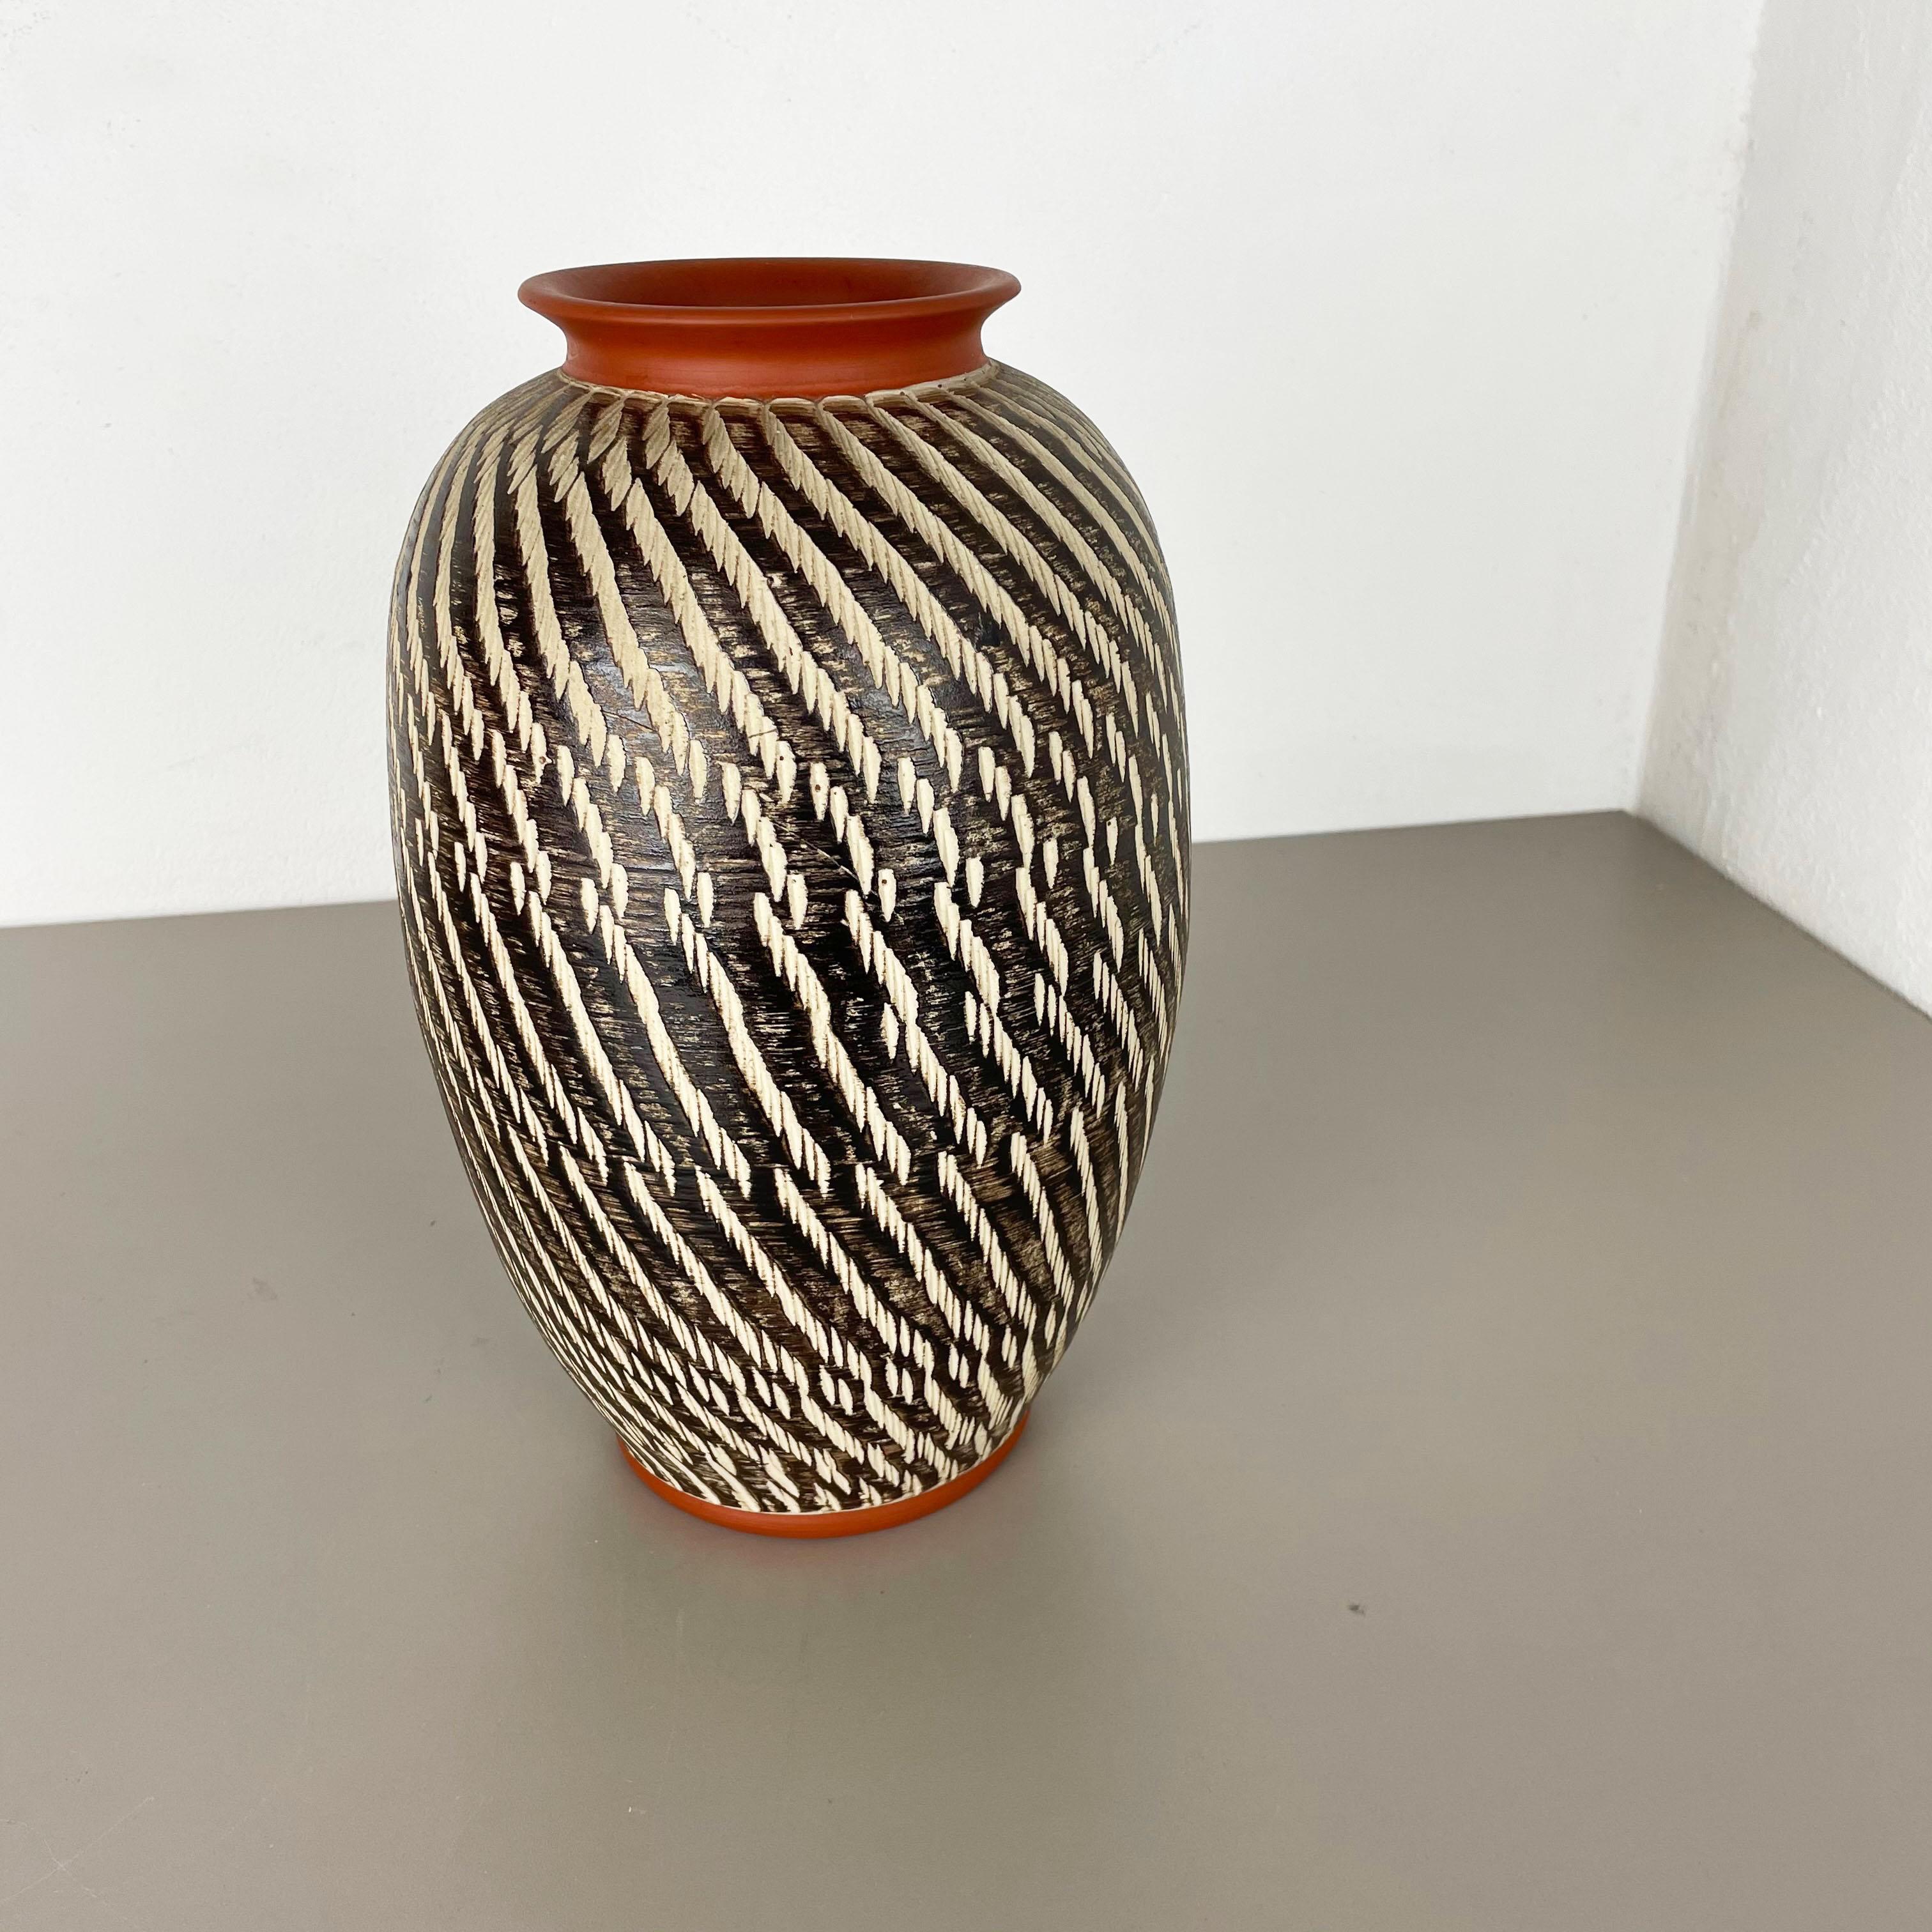 Article:

Abstract pottery vase



Producer:

WEKARA, Germany



Decade:

1960s


These original vintage vases was produced in the 1960s in Germany. It is made of ceramic pottery with abstract illustration, typical for the age